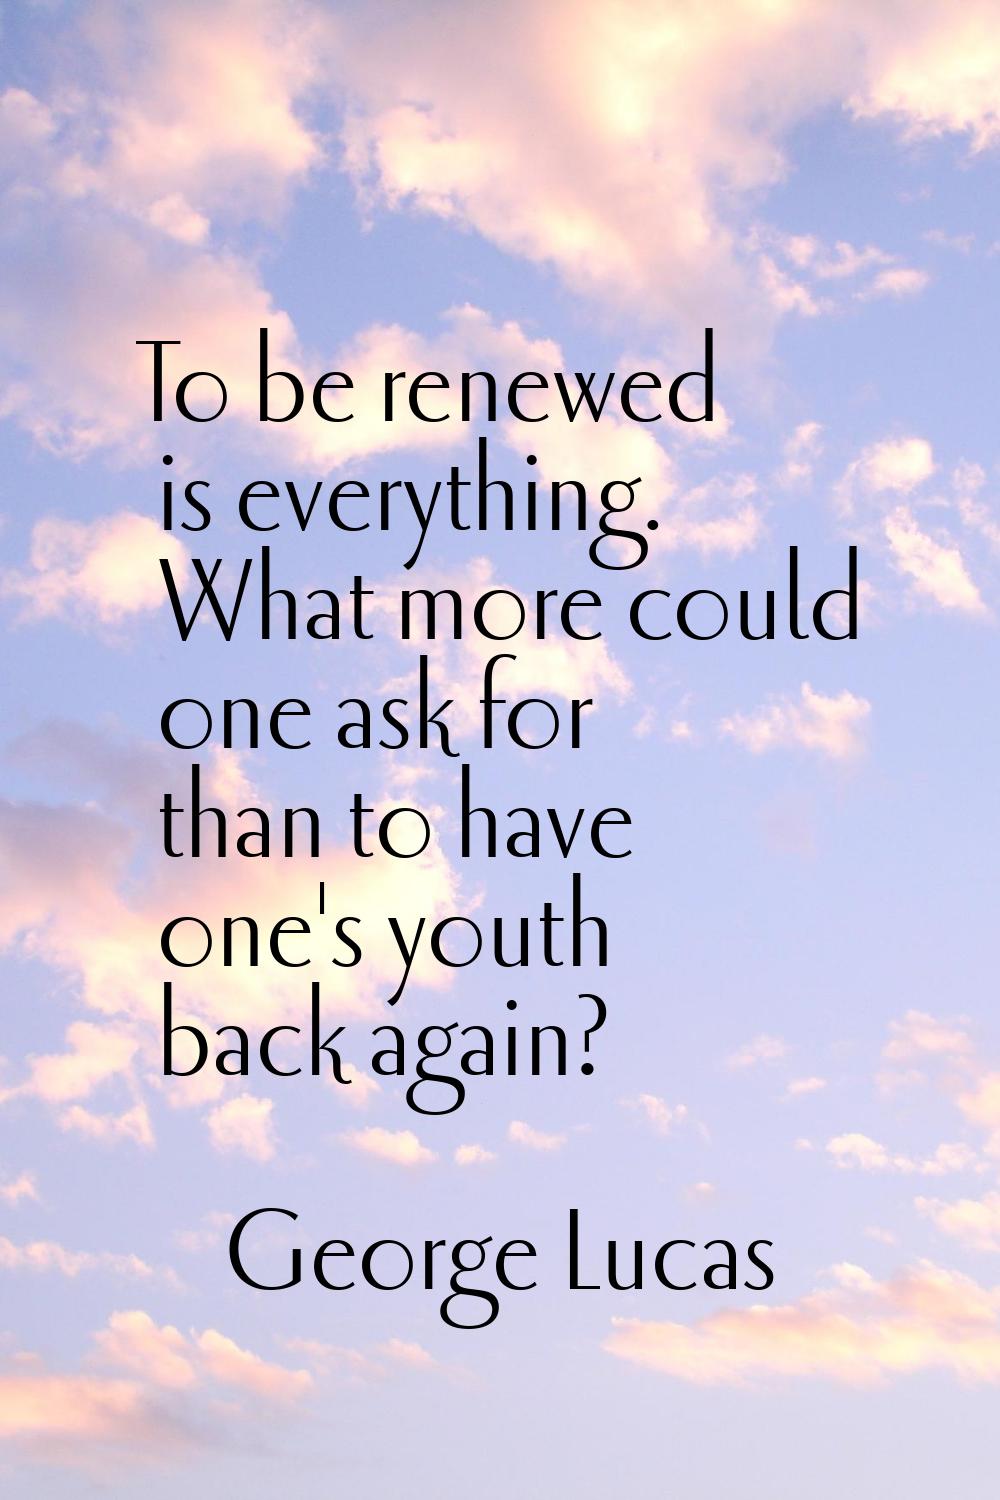 To be renewed is everything. What more could one ask for than to have one's youth back again?